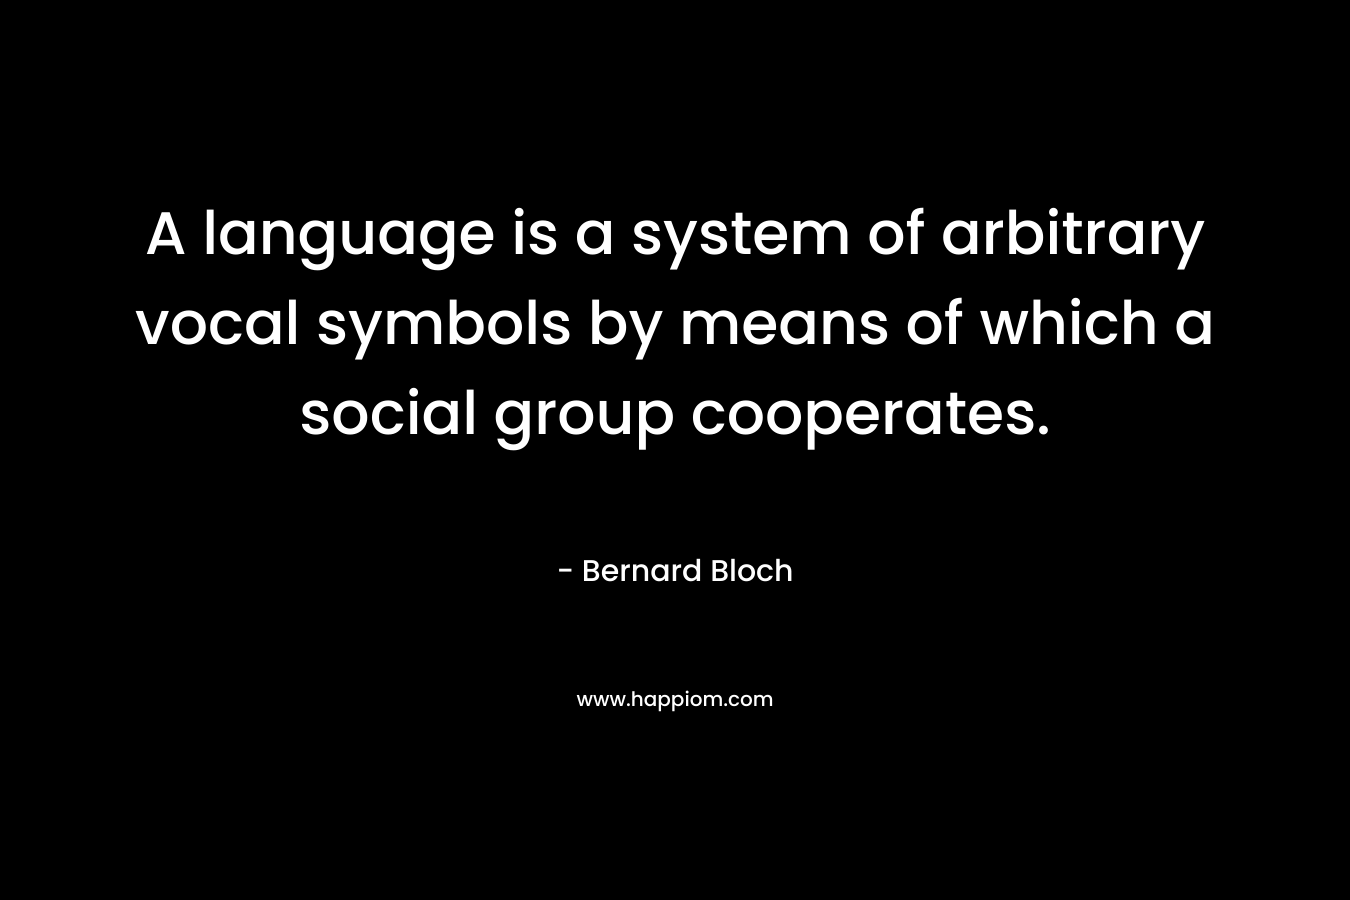 A language is a system of arbitrary vocal symbols by means of which a social group cooperates. – Bernard Bloch